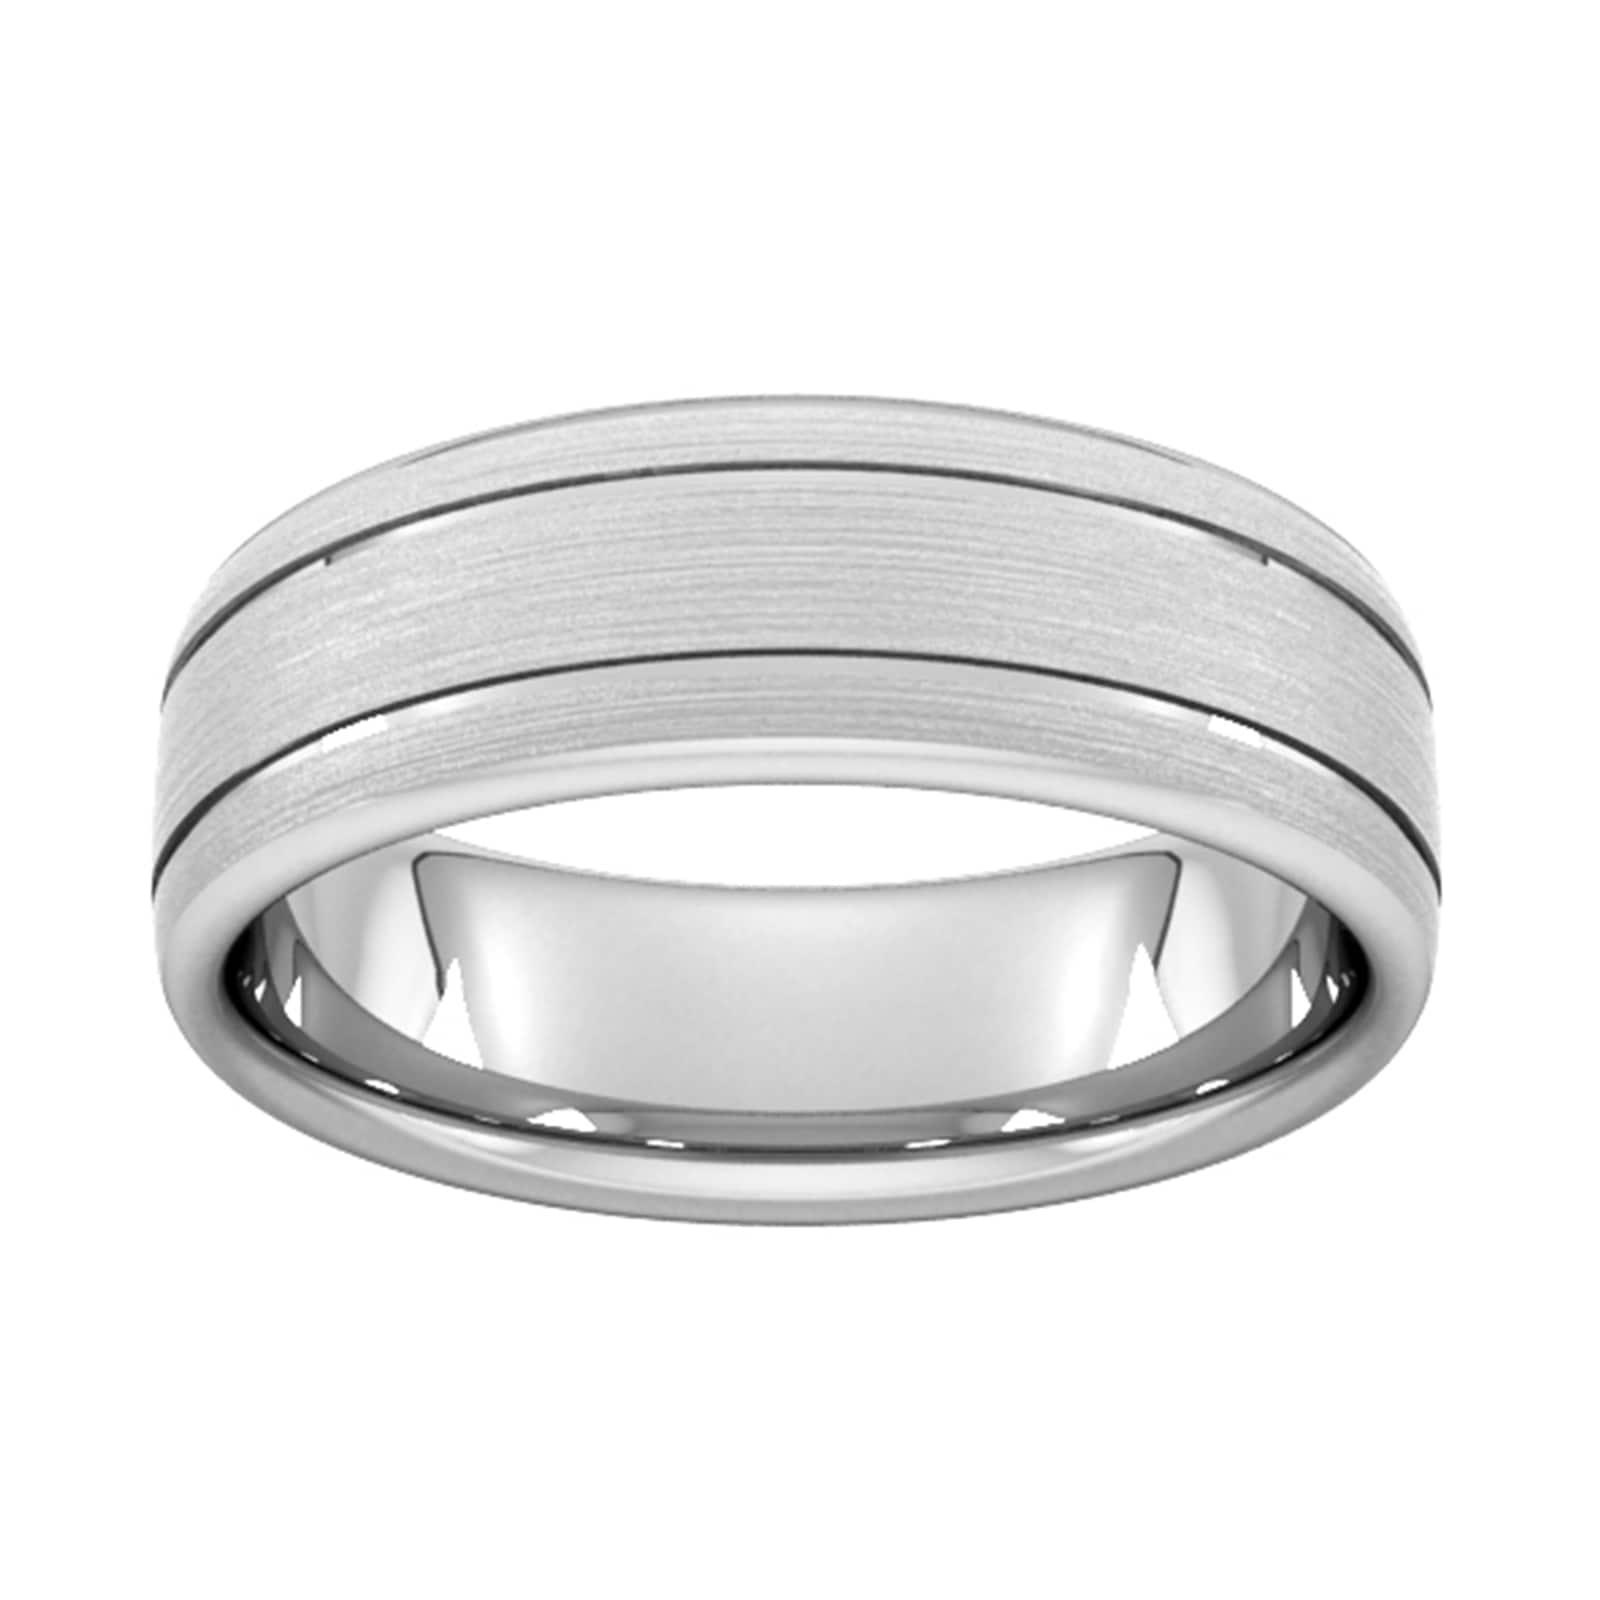 7mm Slight Court Standard Matt Finish With Double Grooves Wedding Ring In 9 Carat White Gold - Ring Size Z